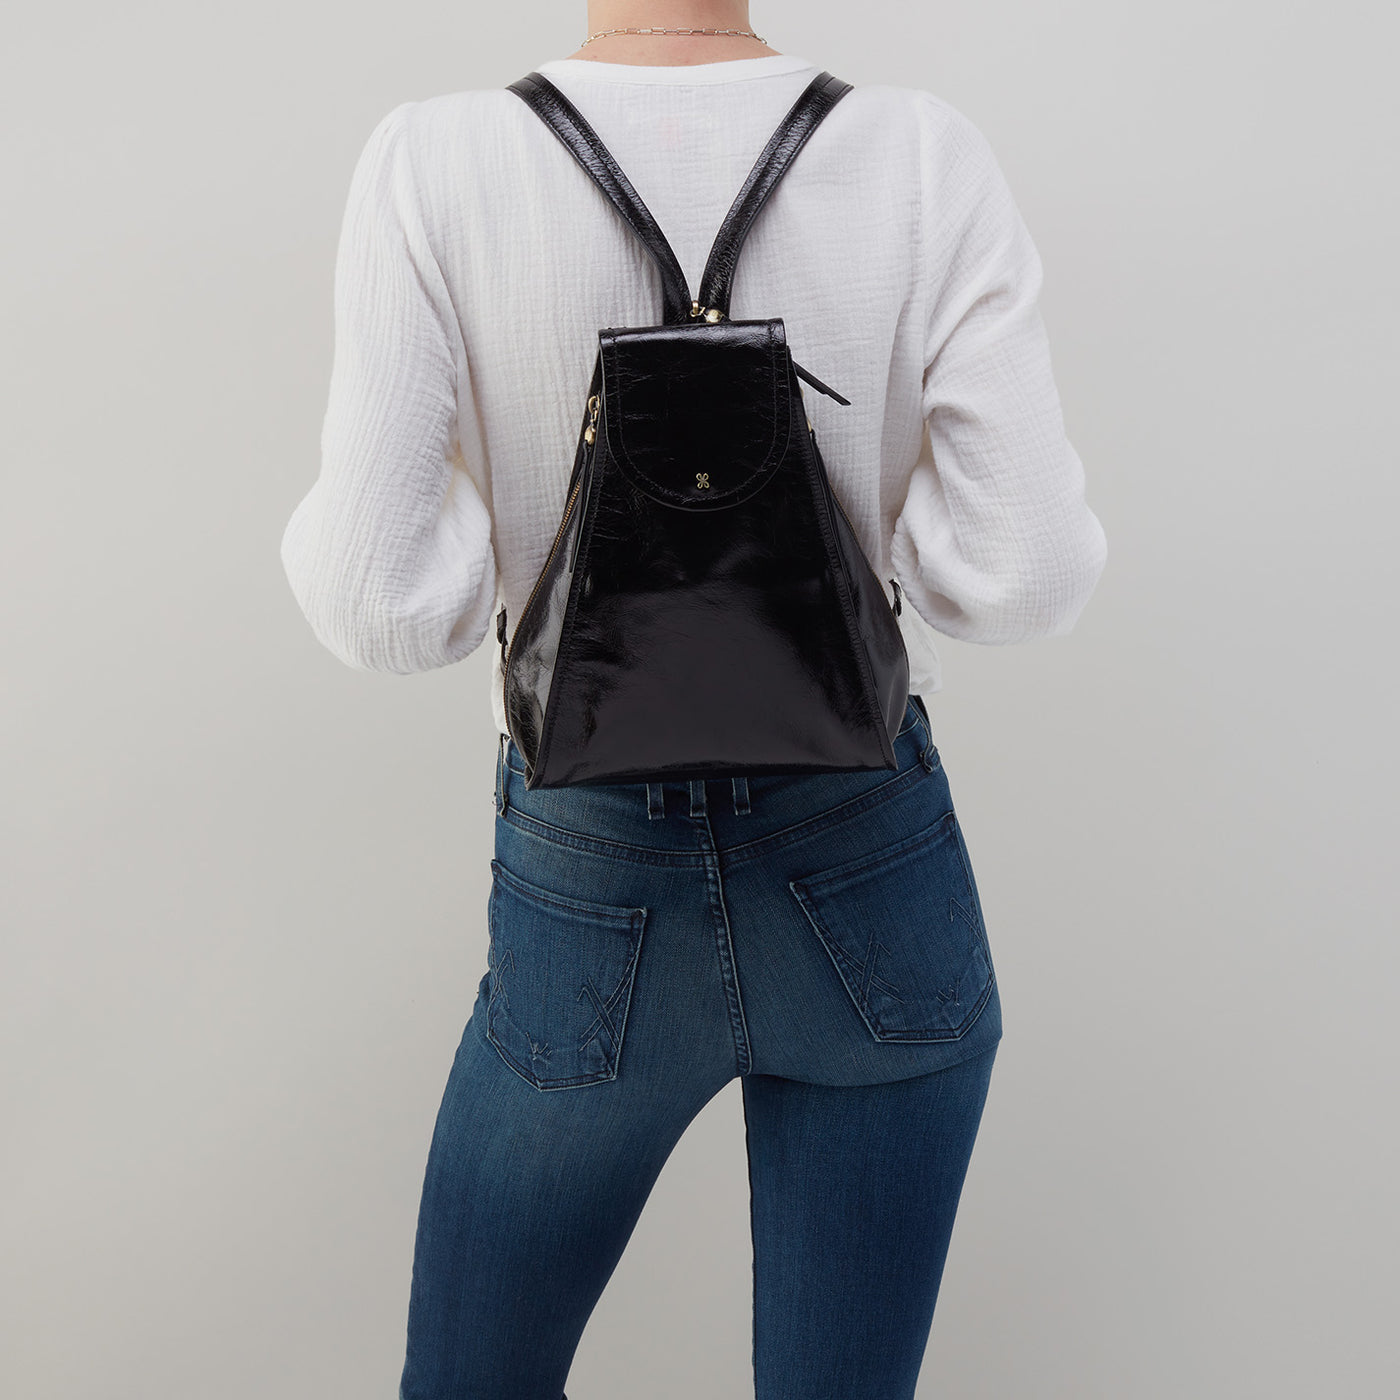 Betta Sling in Polished Leather - Black